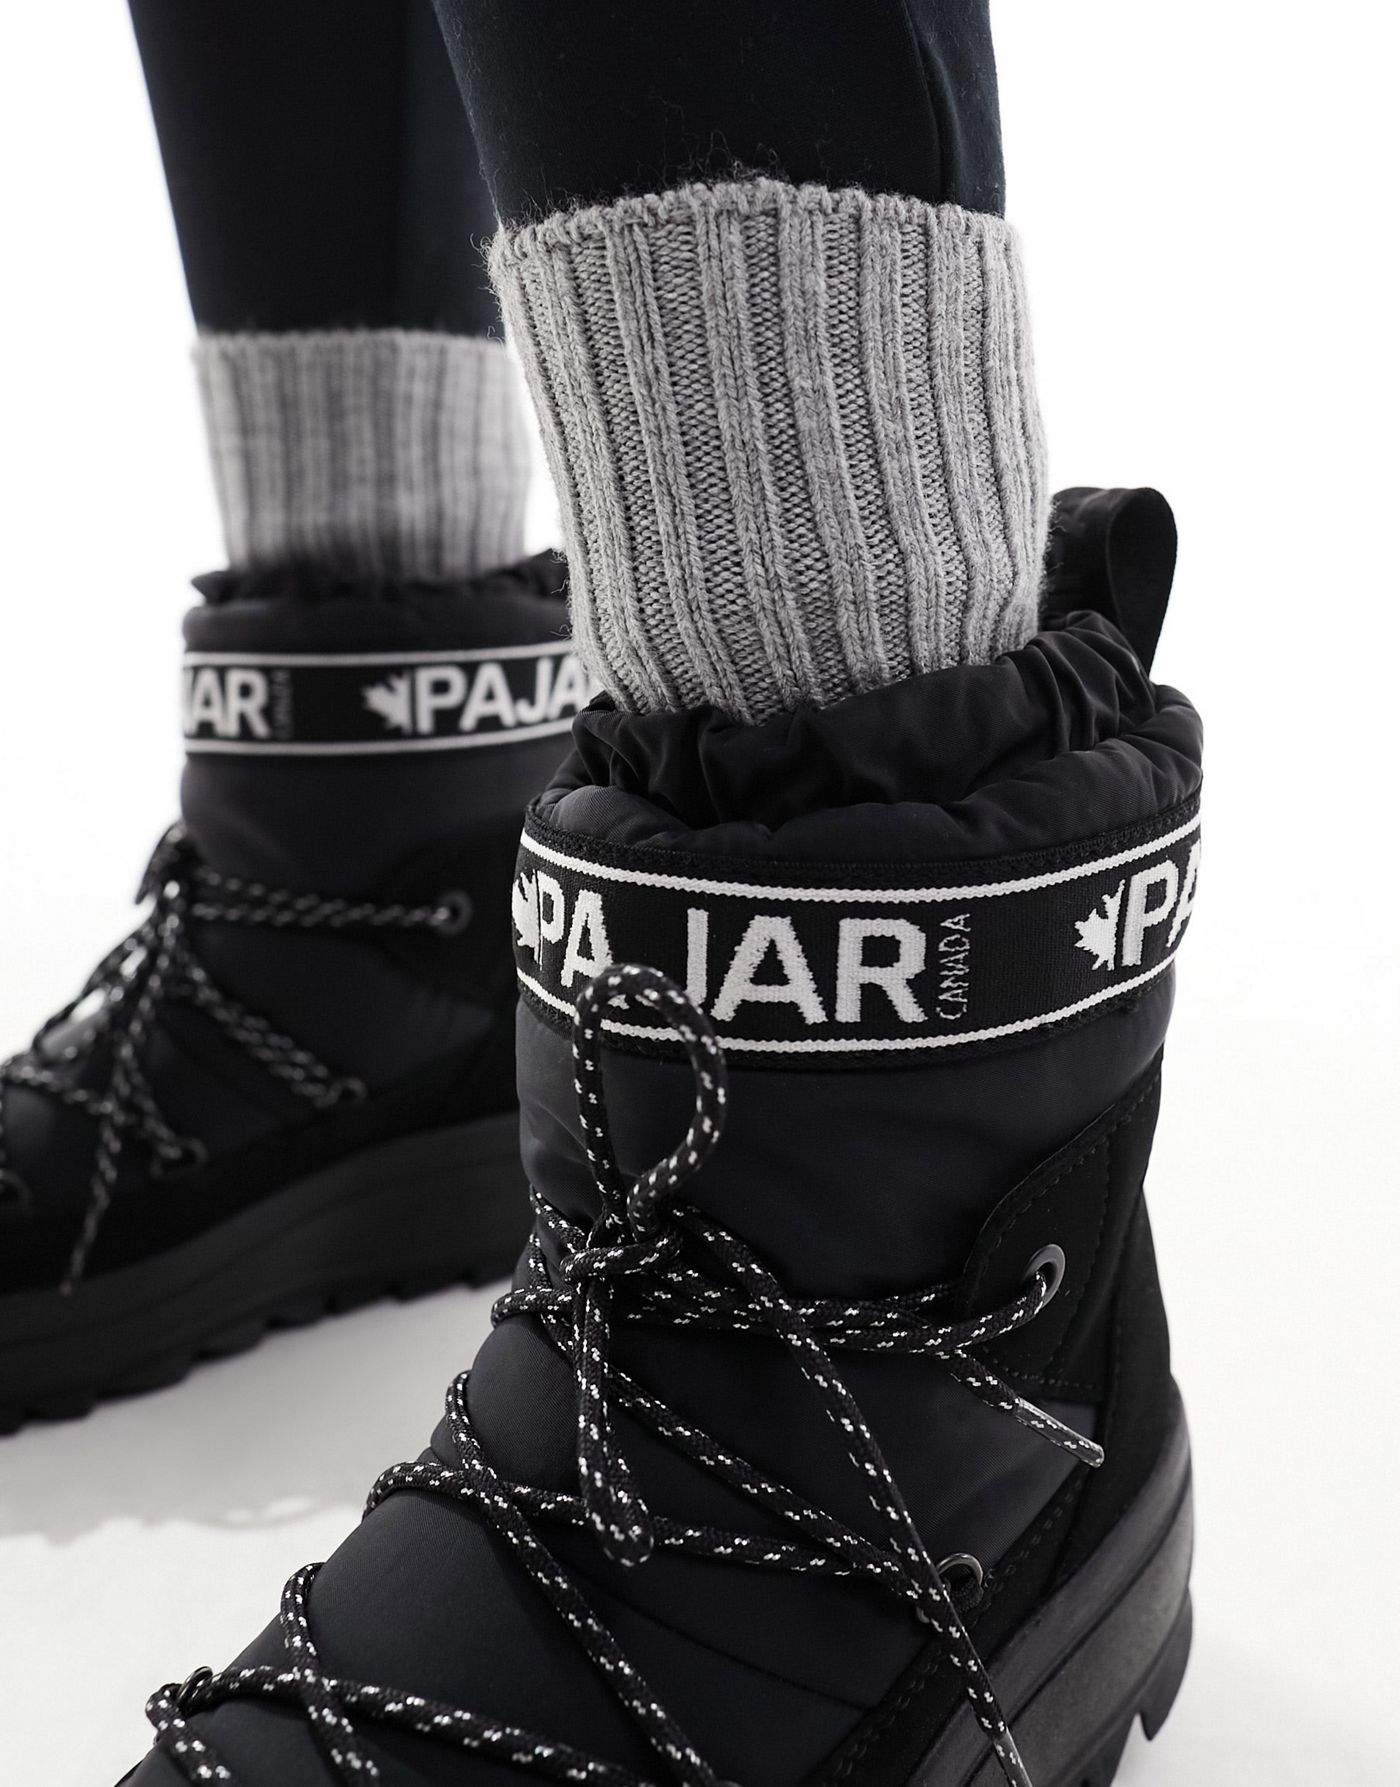 Pajar quilted snow boots in black